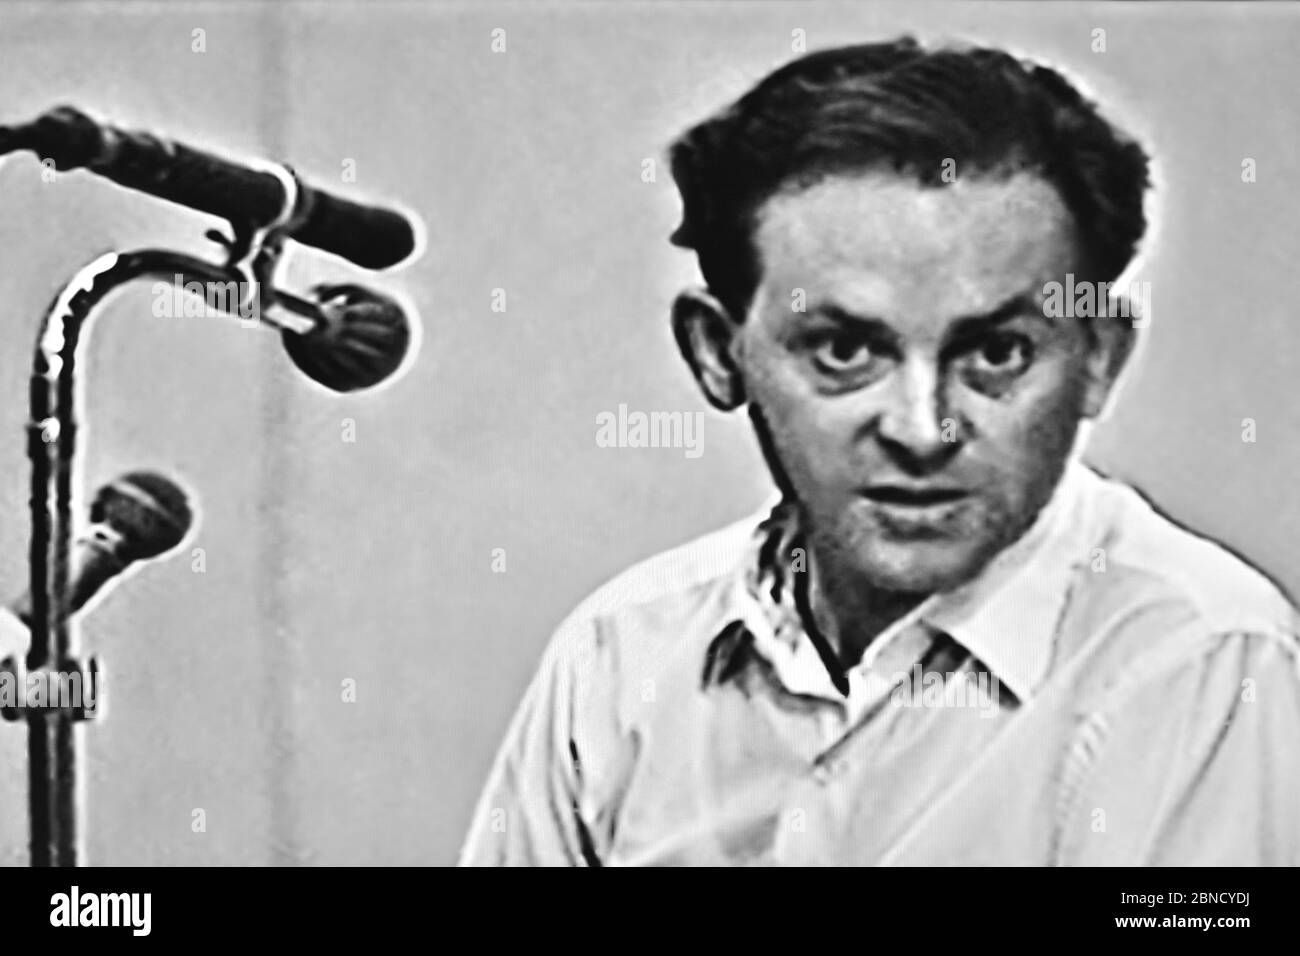 Yehuda Bacon testifying at the trial of Adolf Eichmann in the District Court of Jerusalem  07 June 1961 Stock Photo